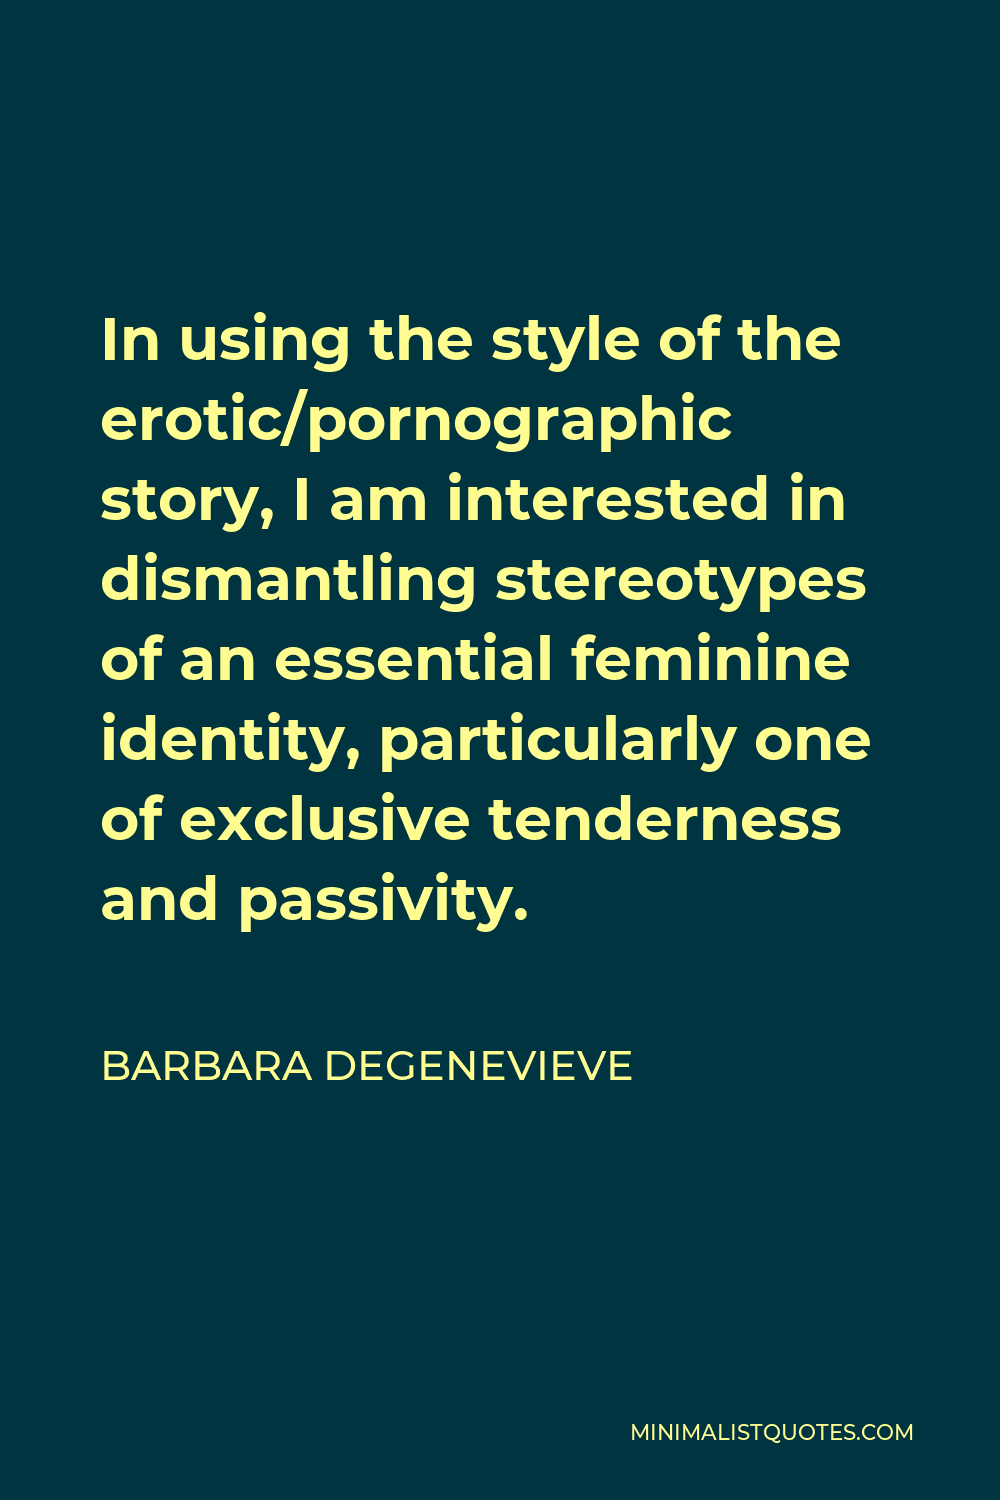 Barbara Degenevieve Quote - In using the style of the erotic/pornographic story, I am interested in dismantling stereotypes of an essential feminine identity, particularly one of exclusive tenderness and passivity.